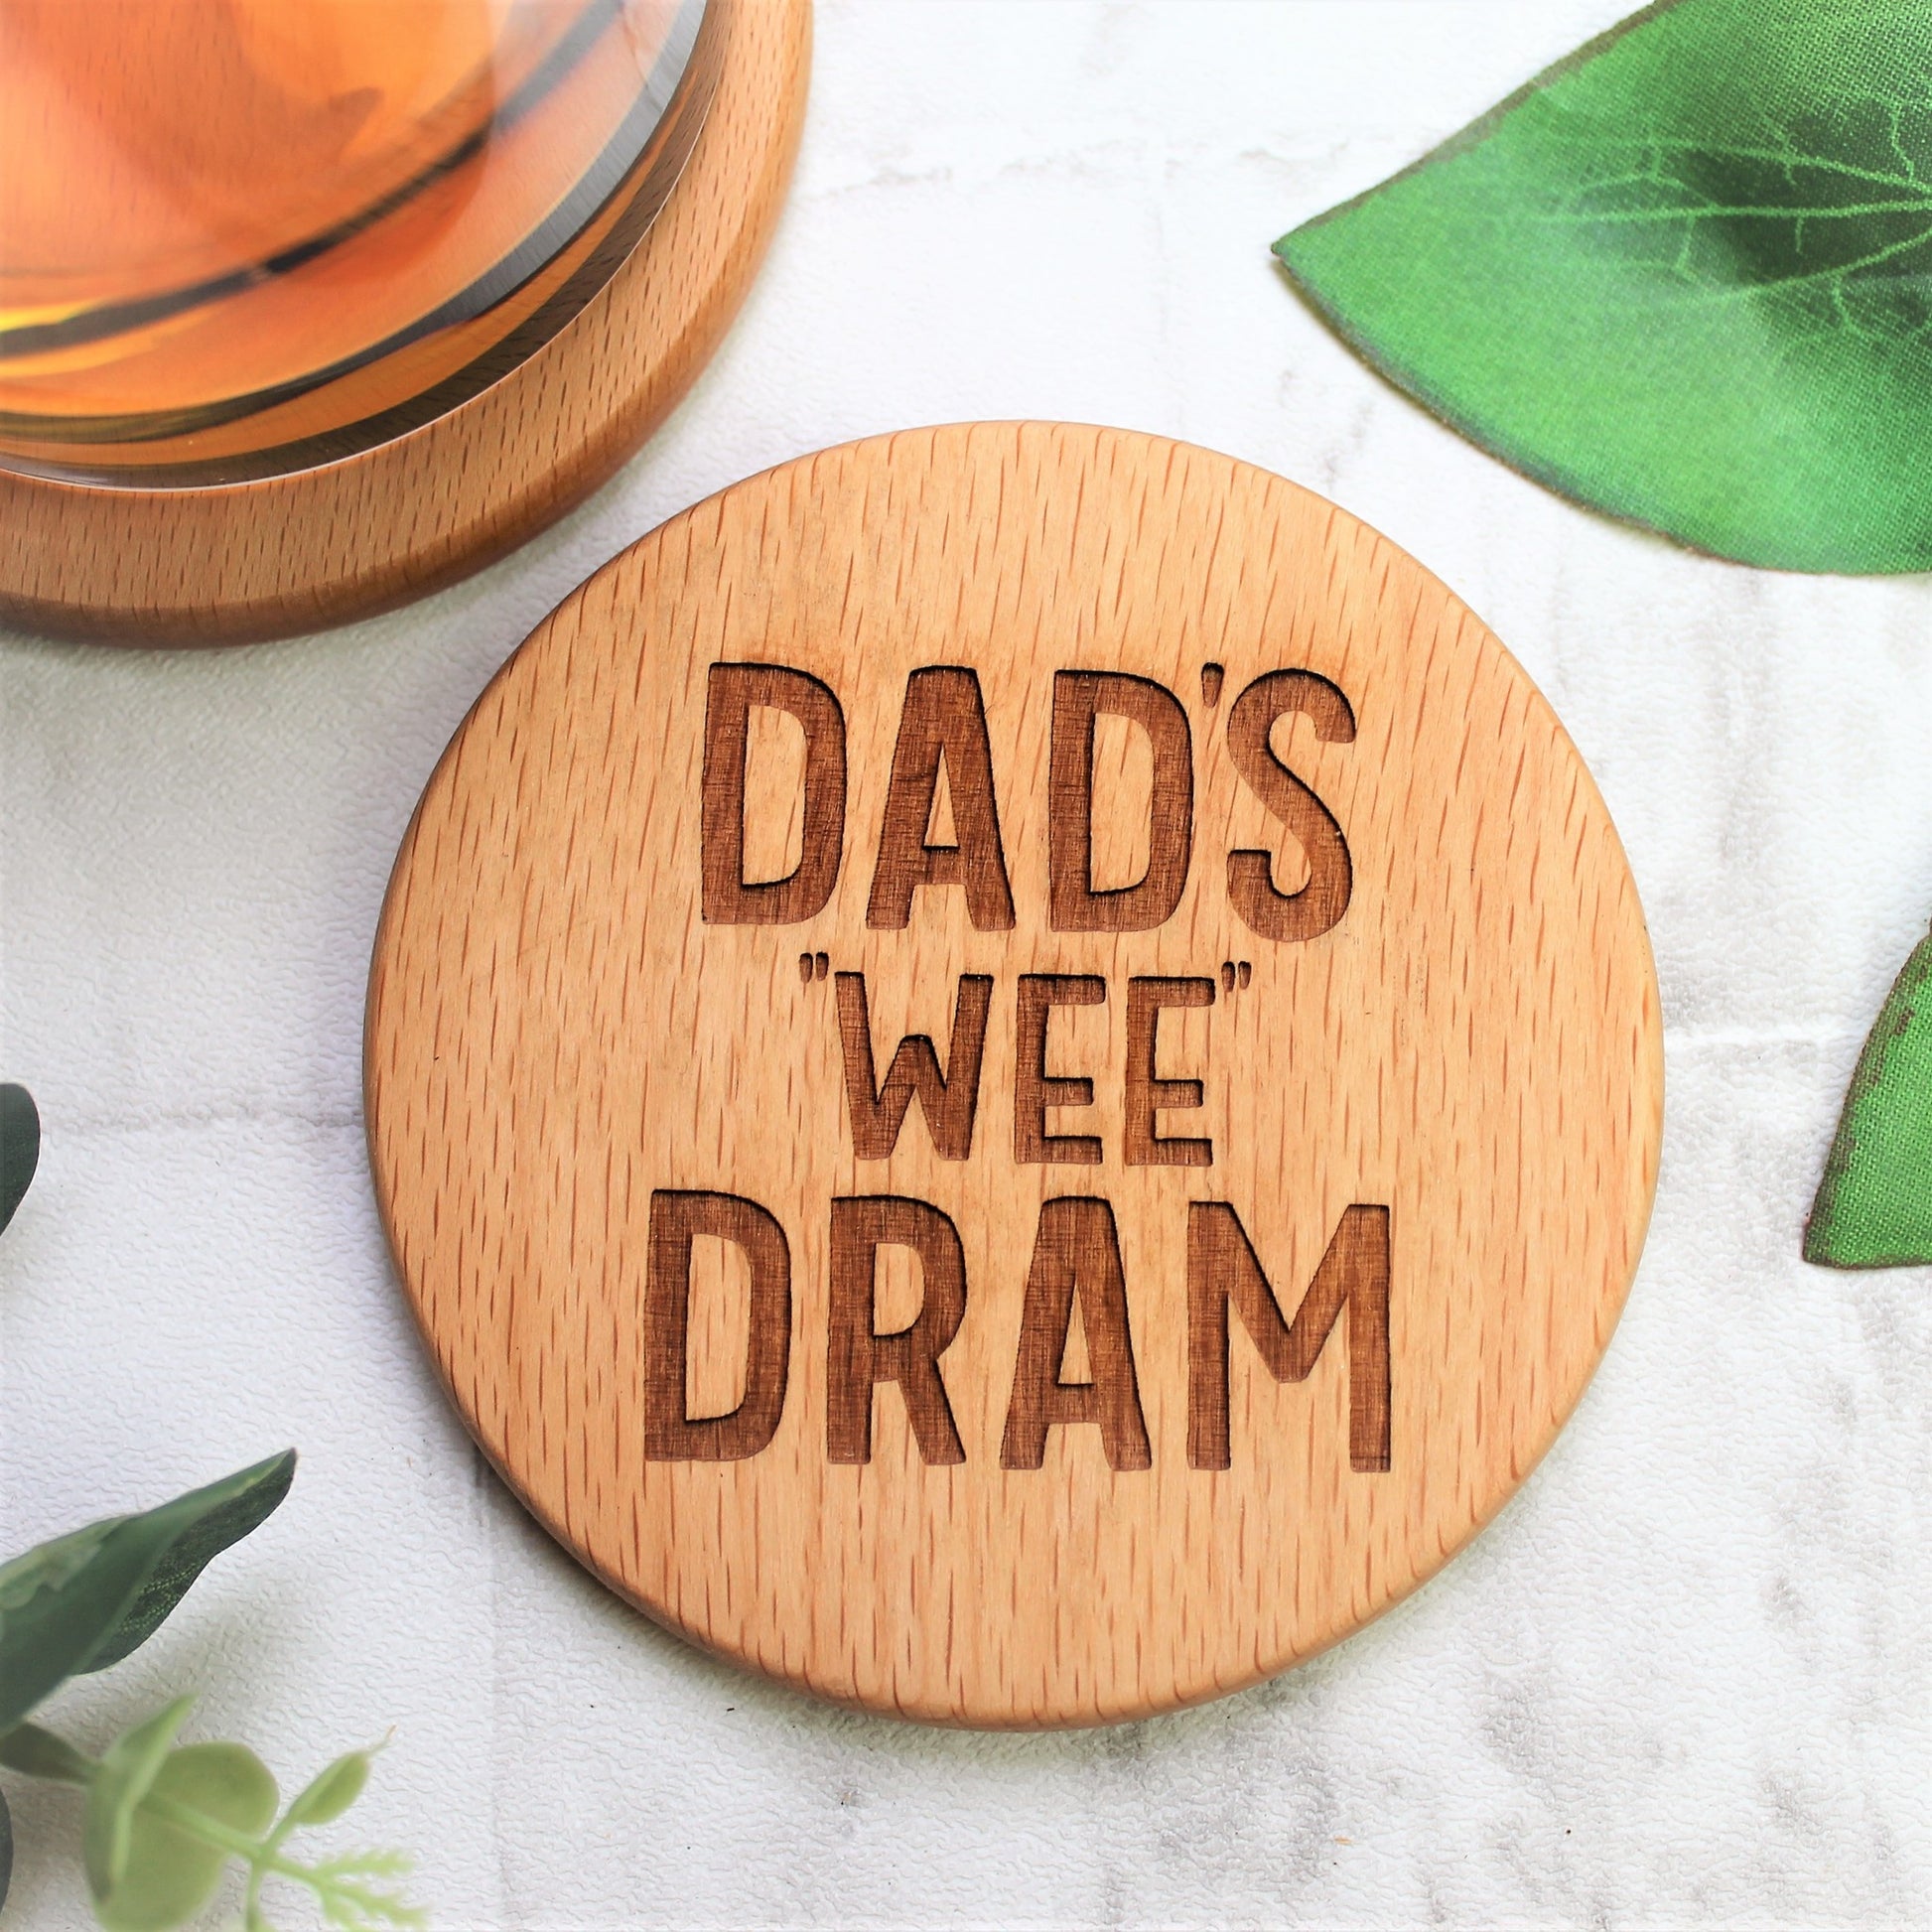 round wooden engraved coaster for dad birthday wee dram whisky gift